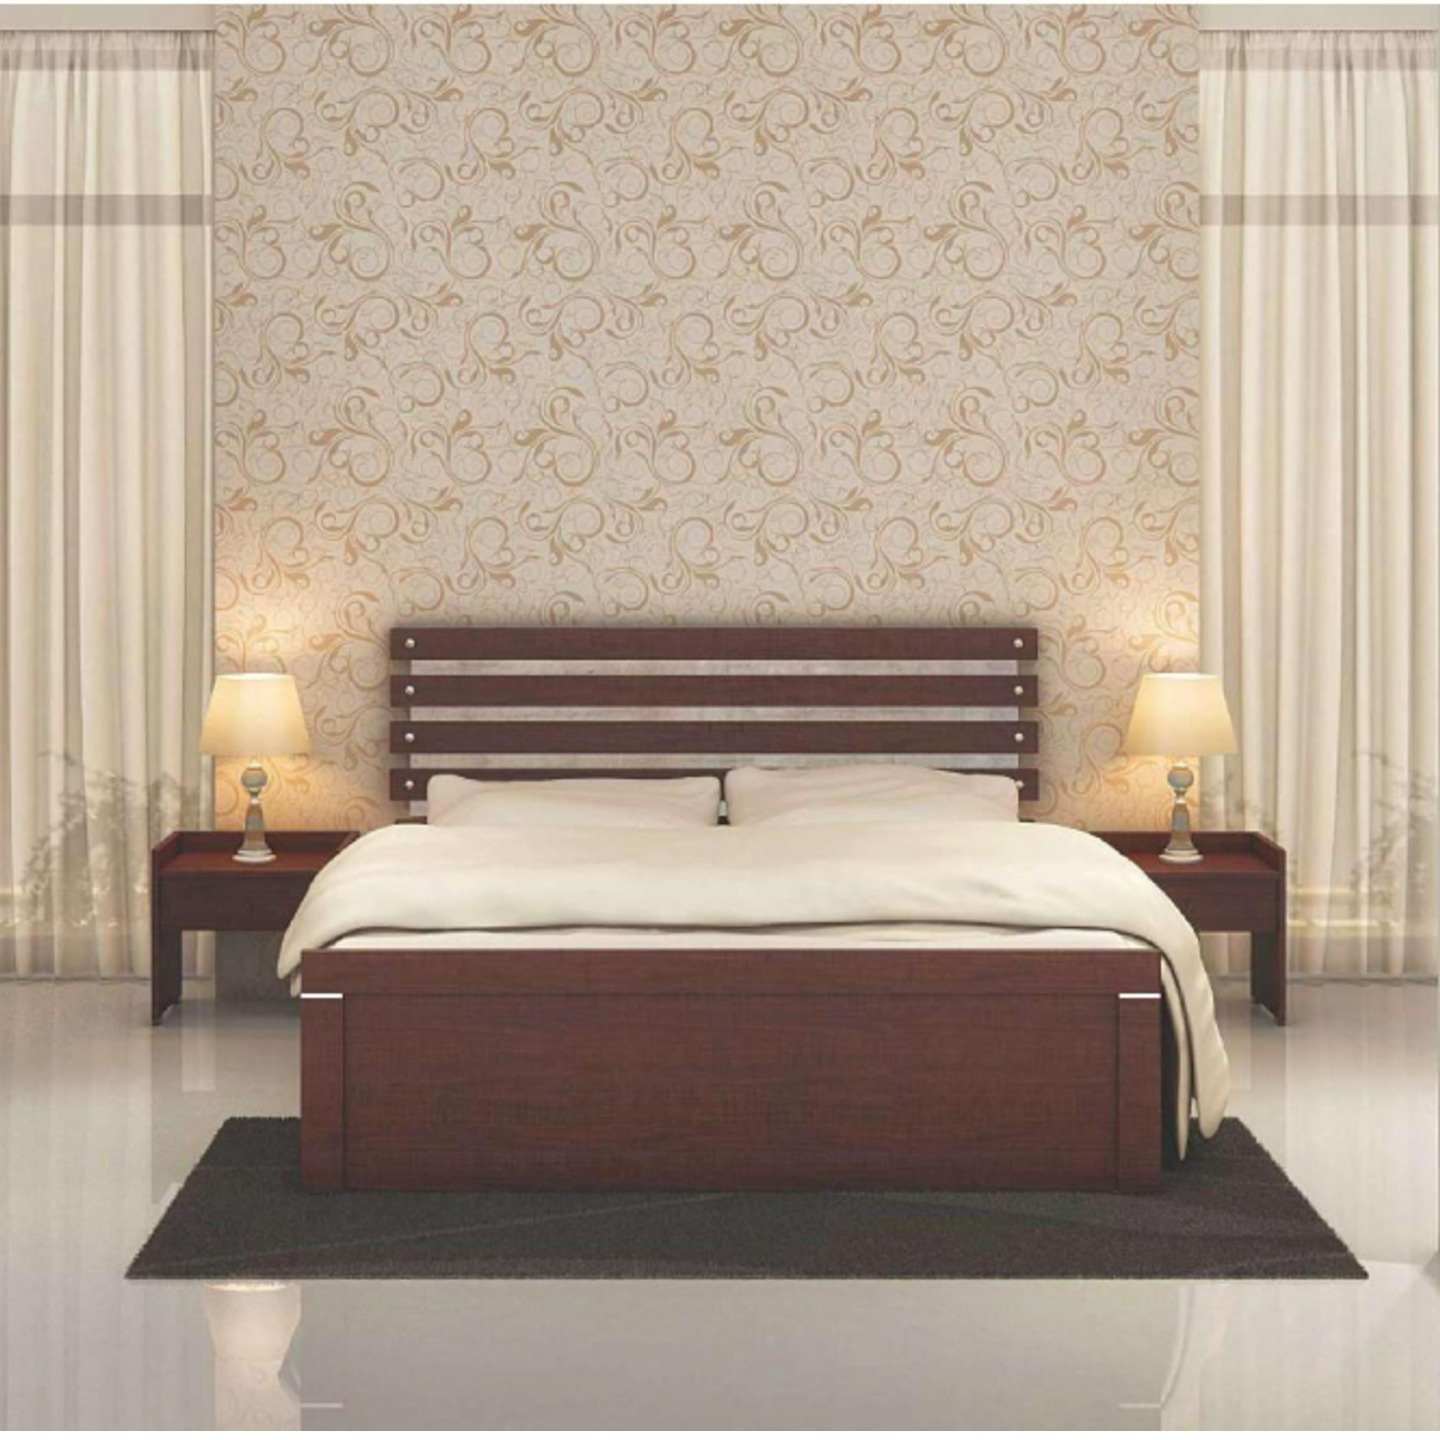 RD King Size Bed 78x 60 Elina Staripes In Brown Colour